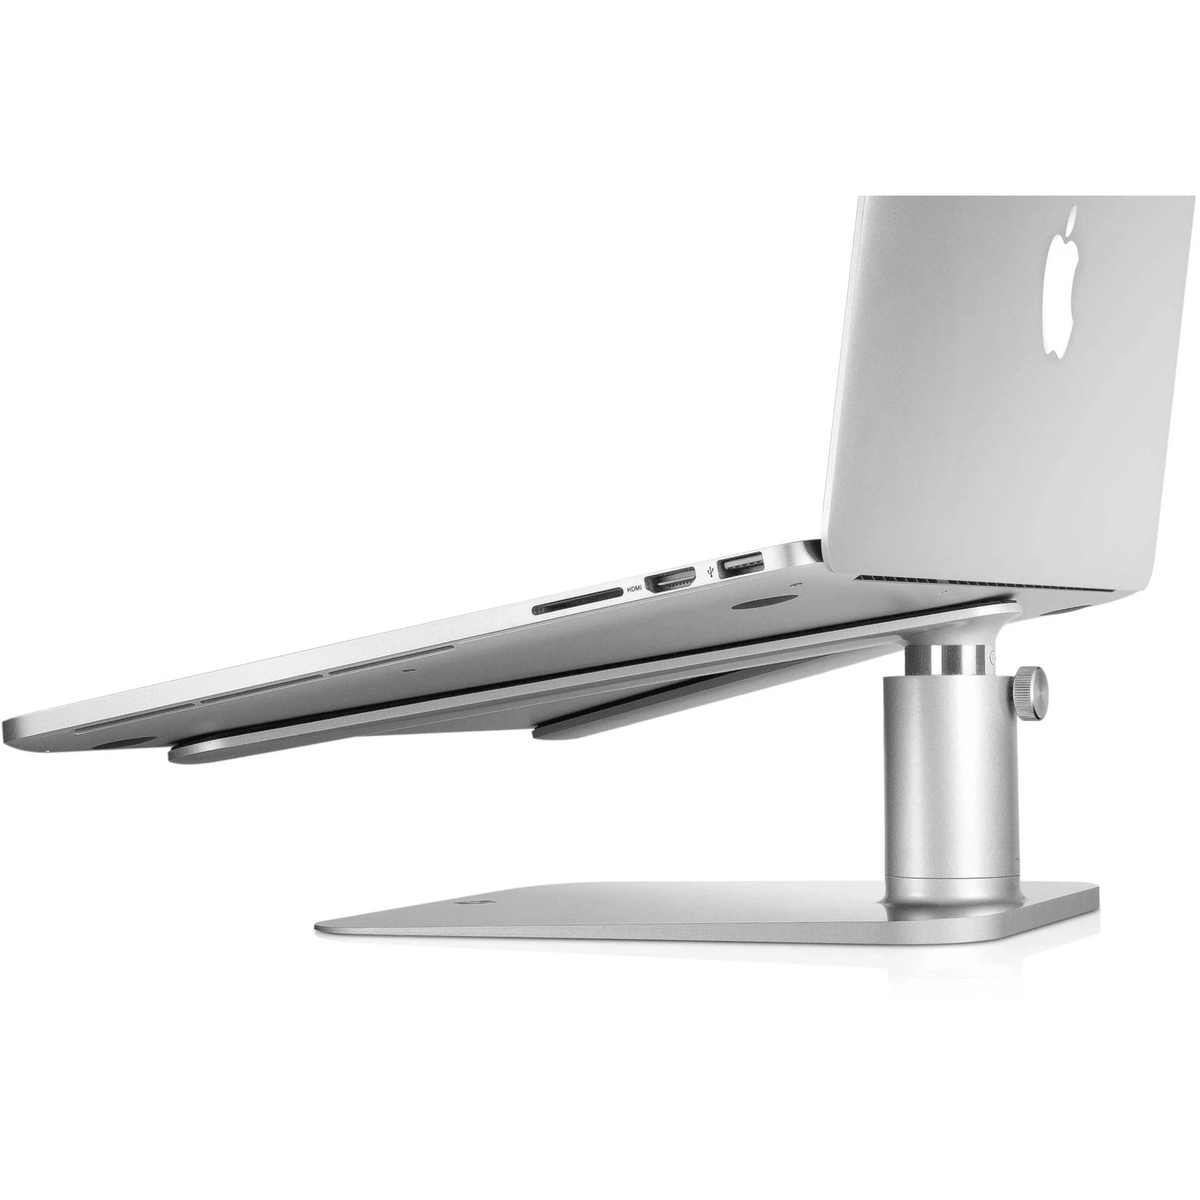 Twelve South HiRise Laptop Adjustable Stand for MacBook - Silver | 12-1222/B (7514122059964)